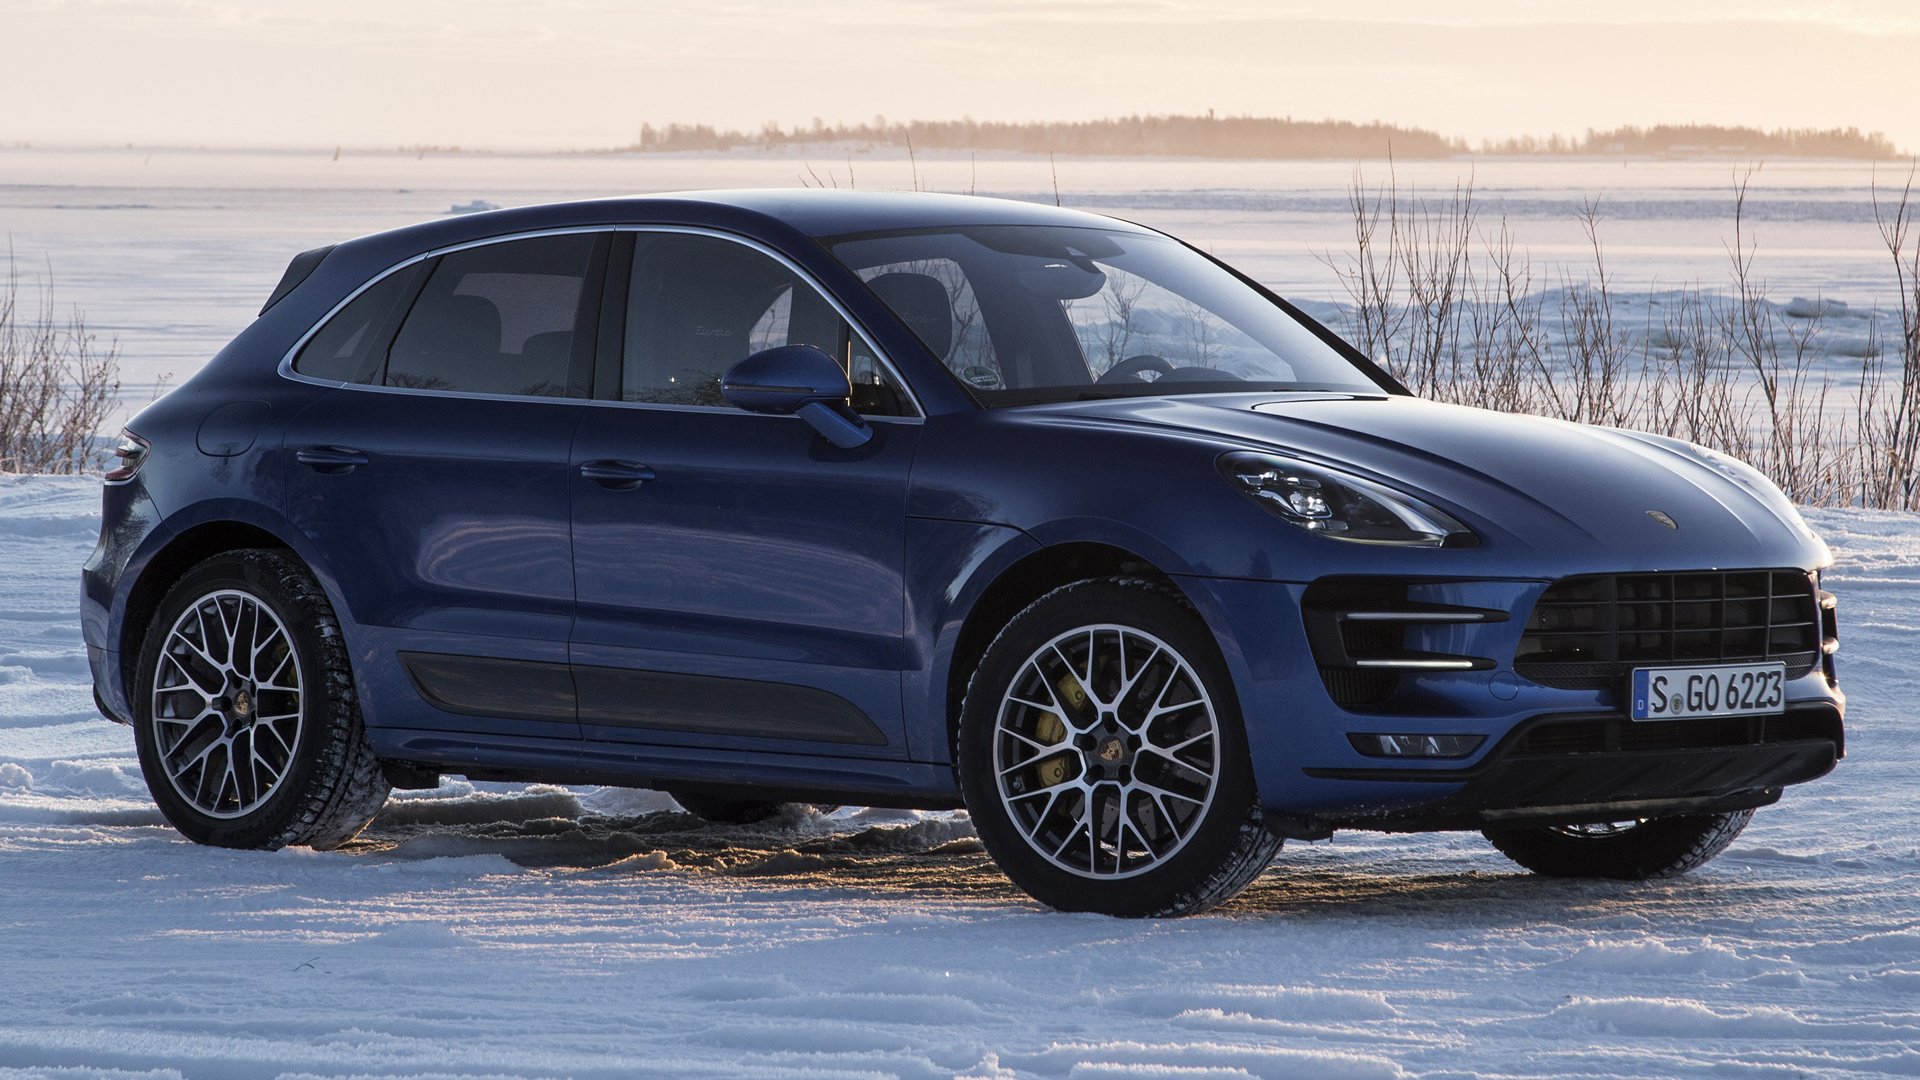 2016 Porsche Macan Turbo Performance Package Hd Wallpaper Background Image 1920x1080